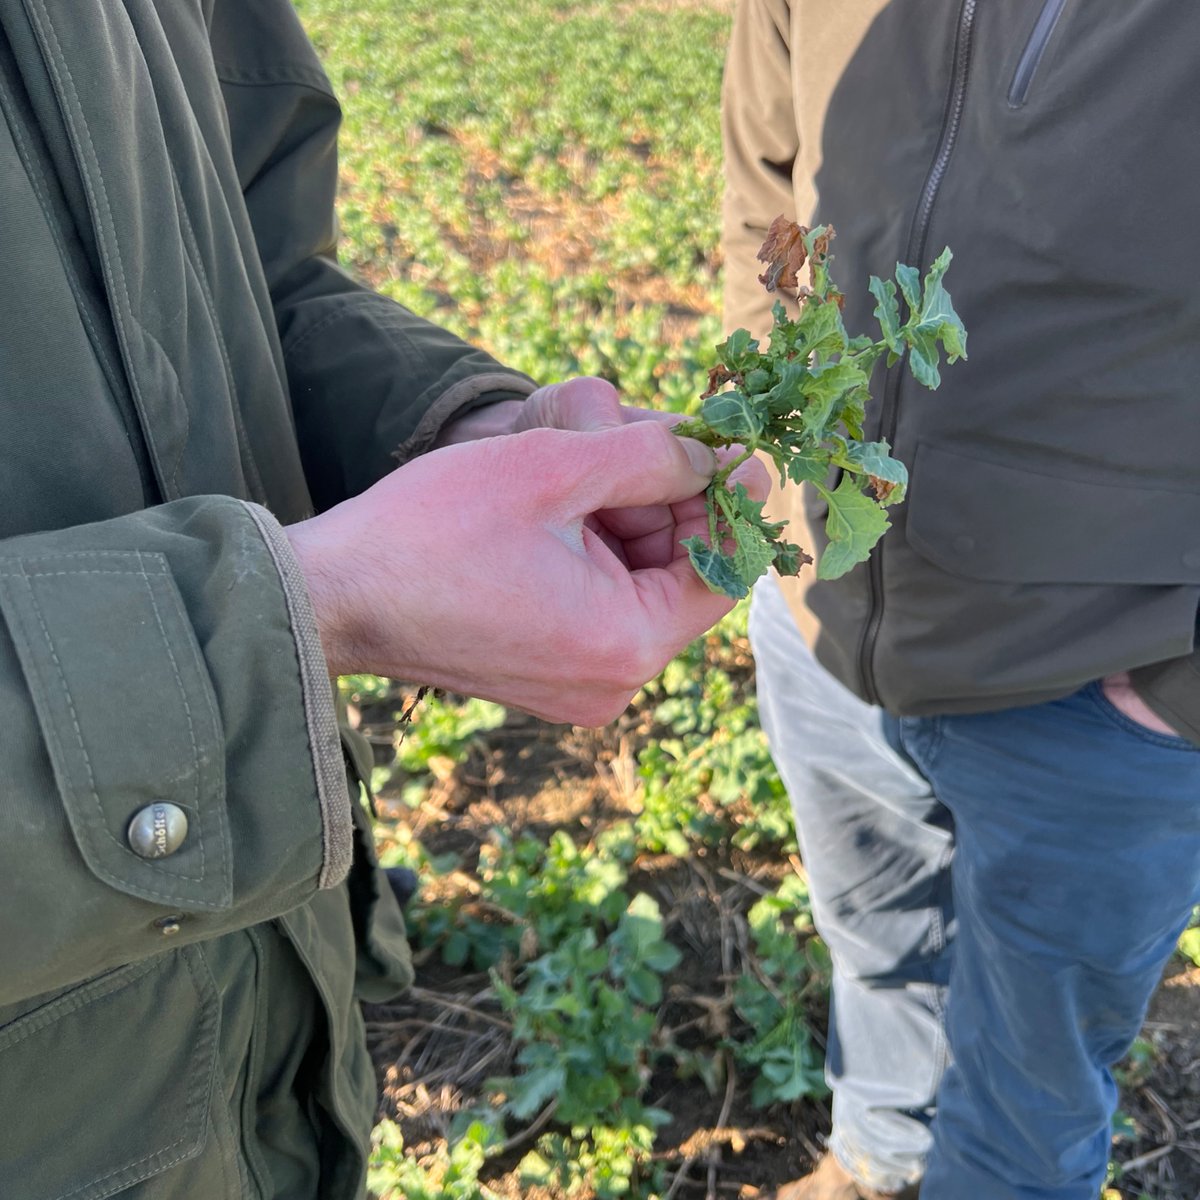 Charlie Ireland out crop walking oilseed rape and checking crops for cabbage stem flea beetle damage. This crop is growing away nicely after having some nitrogen. What are your oilseed rape crops looking like? #agronomy #agronomist #cropmanagement #oilseedrape